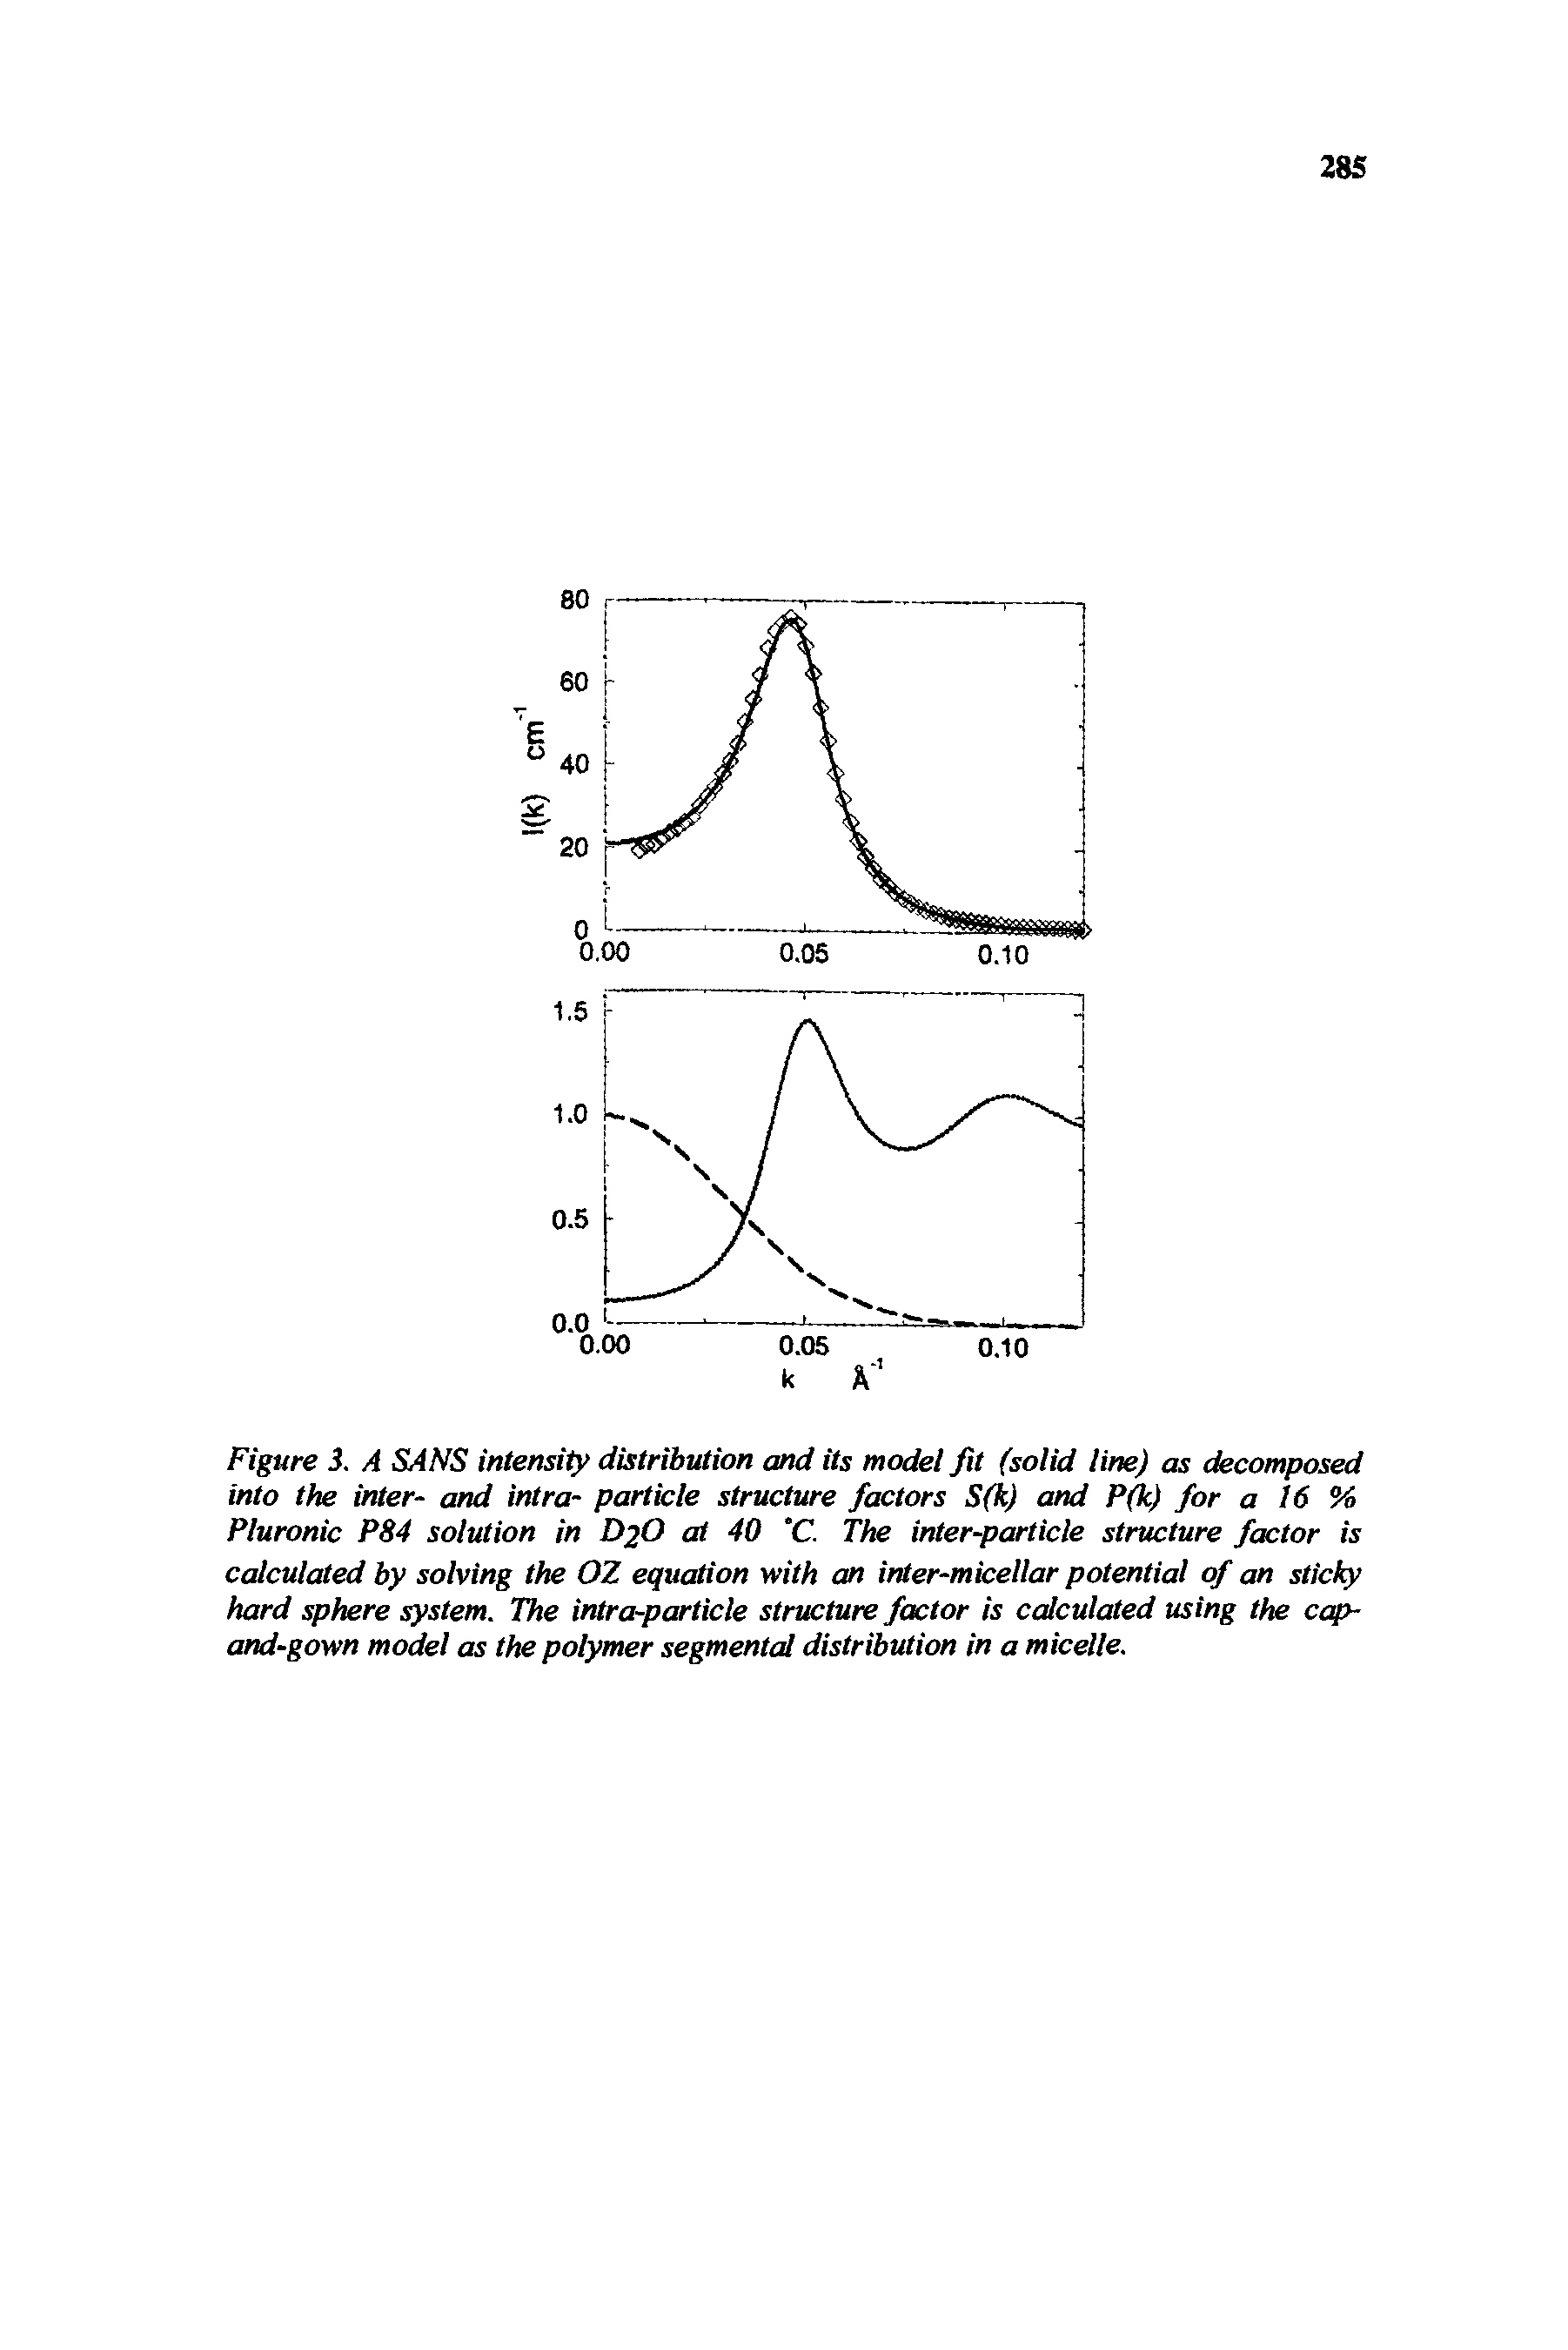 Figure S. A SANS intensity distribution emd its model fit (solid line) as decomposed into the inter- and intro- particle structure factors S(k) and P ) for a 16 % Pluronic P84 solution in D2O at 40 C. The inter-particle structure factor is calculated by solving the OZ equation with an inter-mkellar potential of an sticky hard sphere system. The intra-particle structure factor is cdcidated using the ccp-and-gown model as the polymer segmental distribution in a micelle.